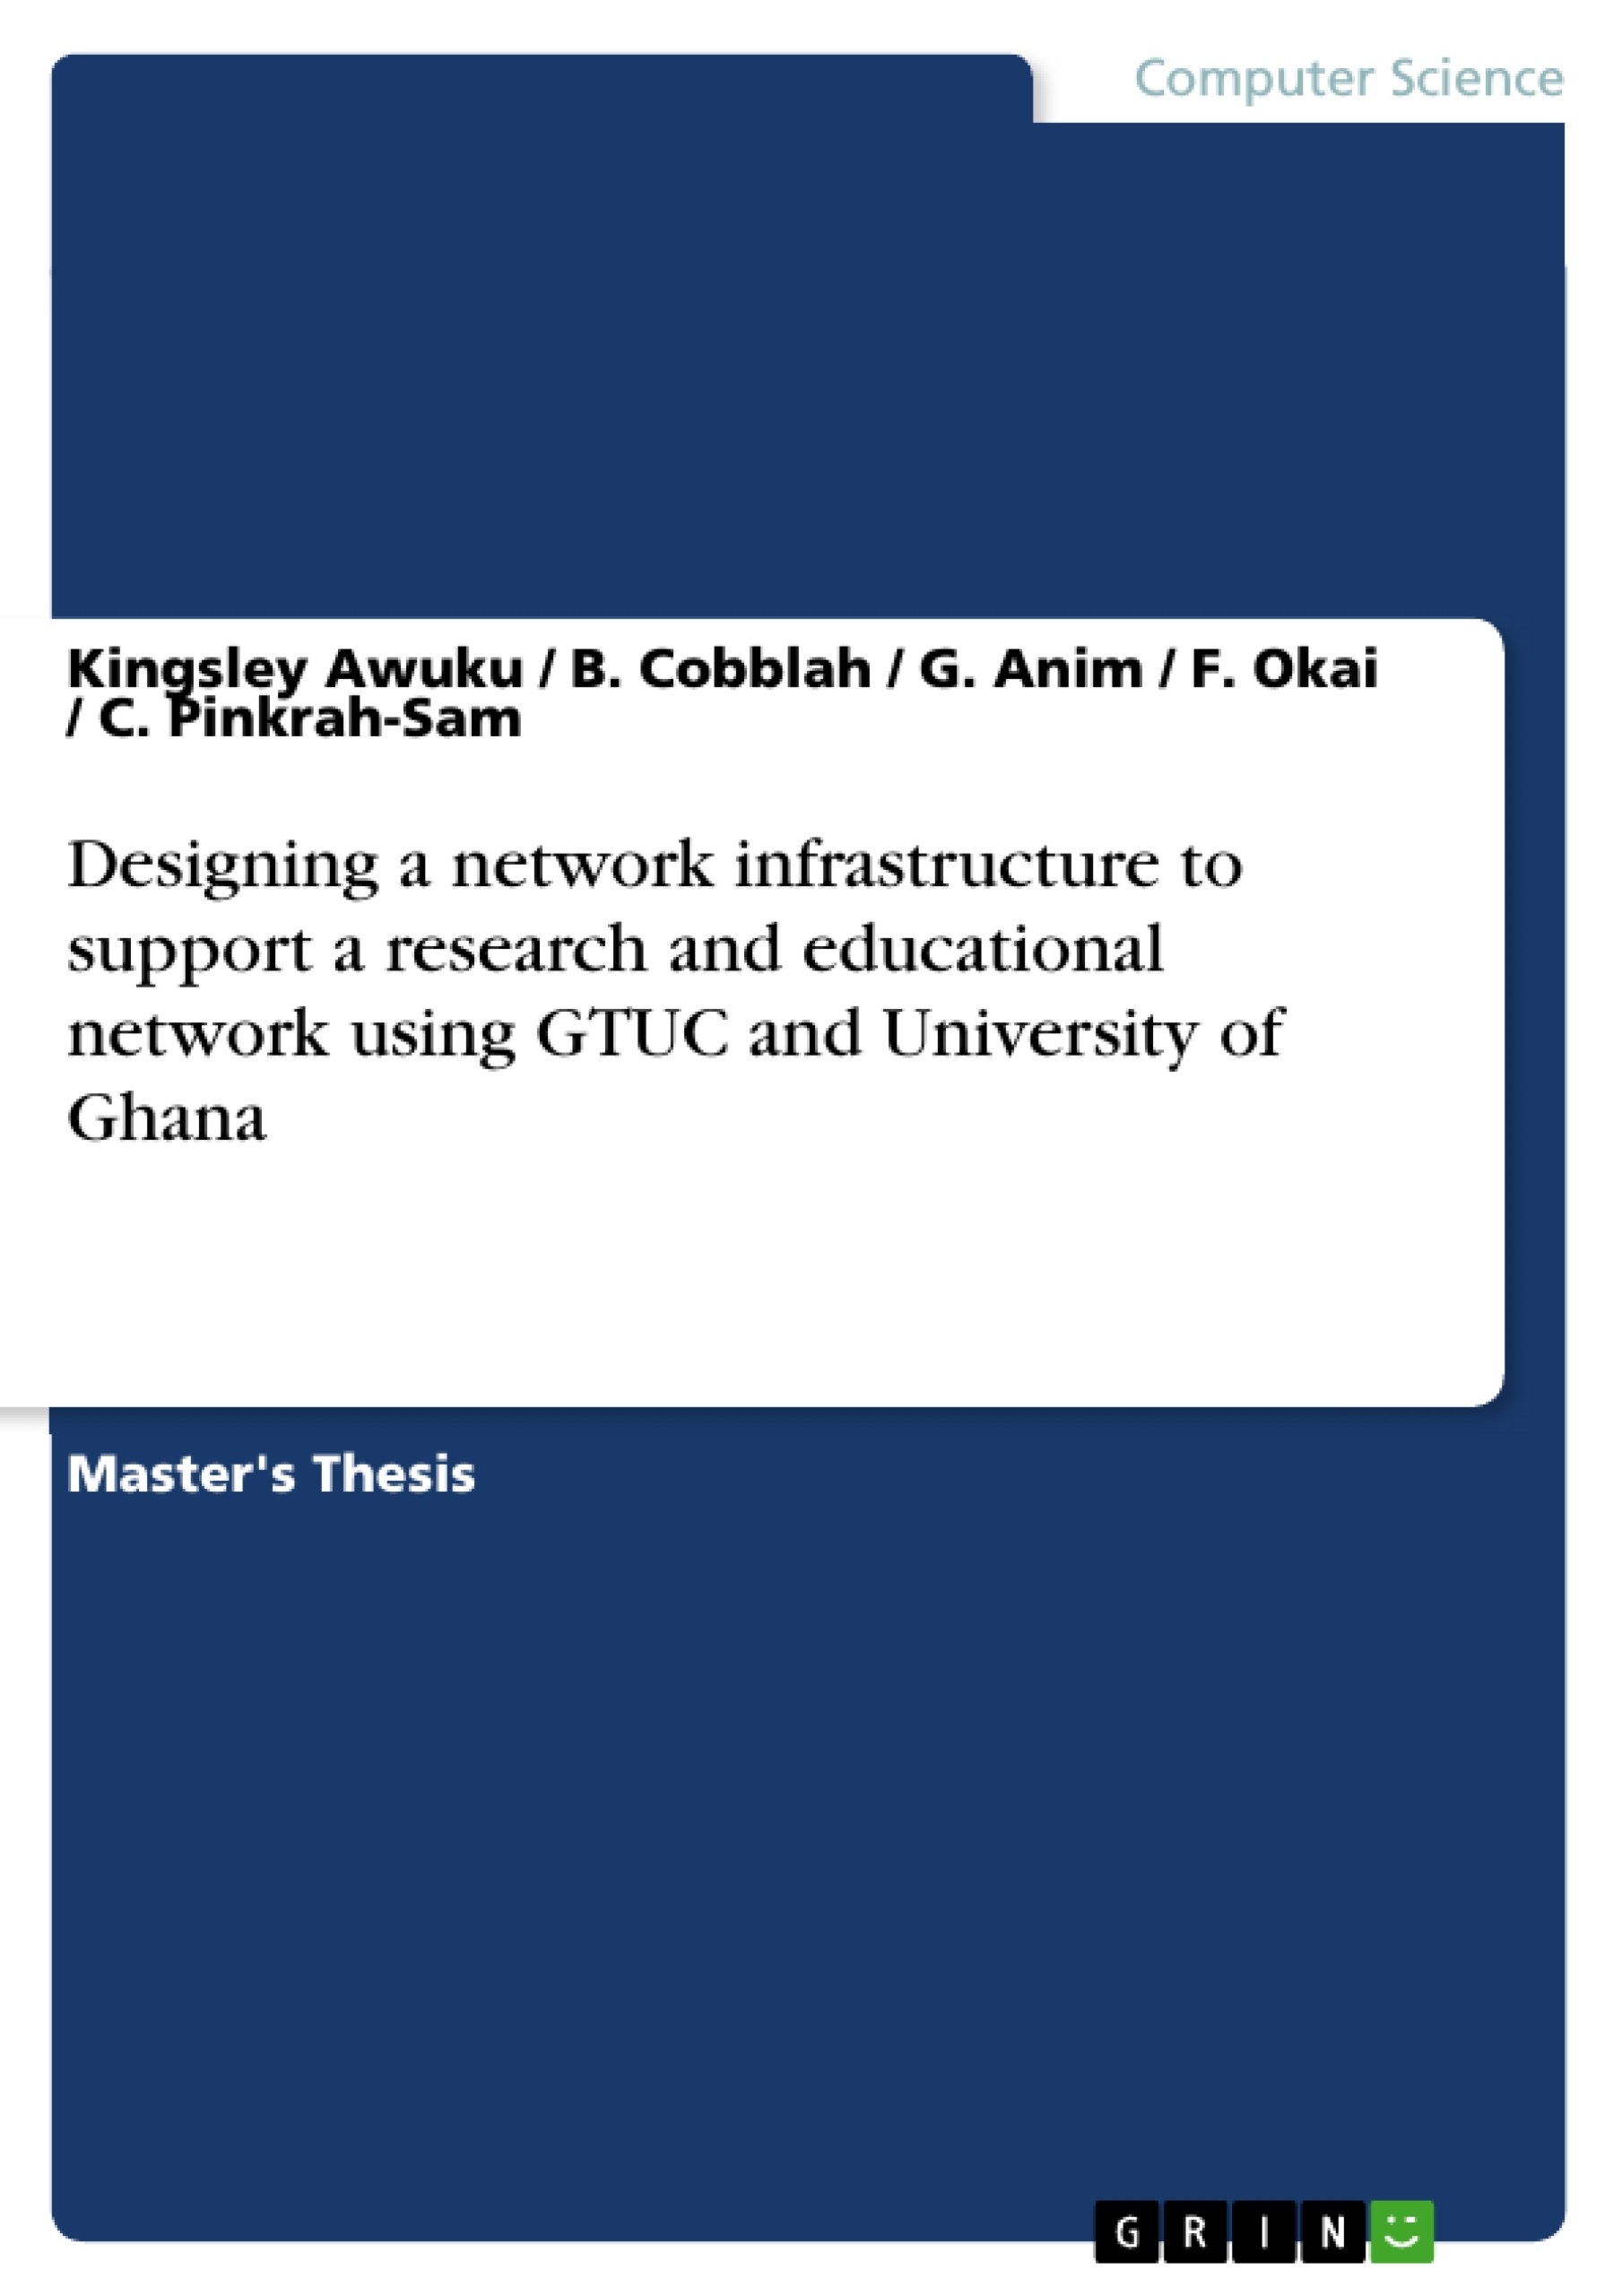 Titre: Designing a network infrastructure to support a research and educational network using GTUC and University of Ghana